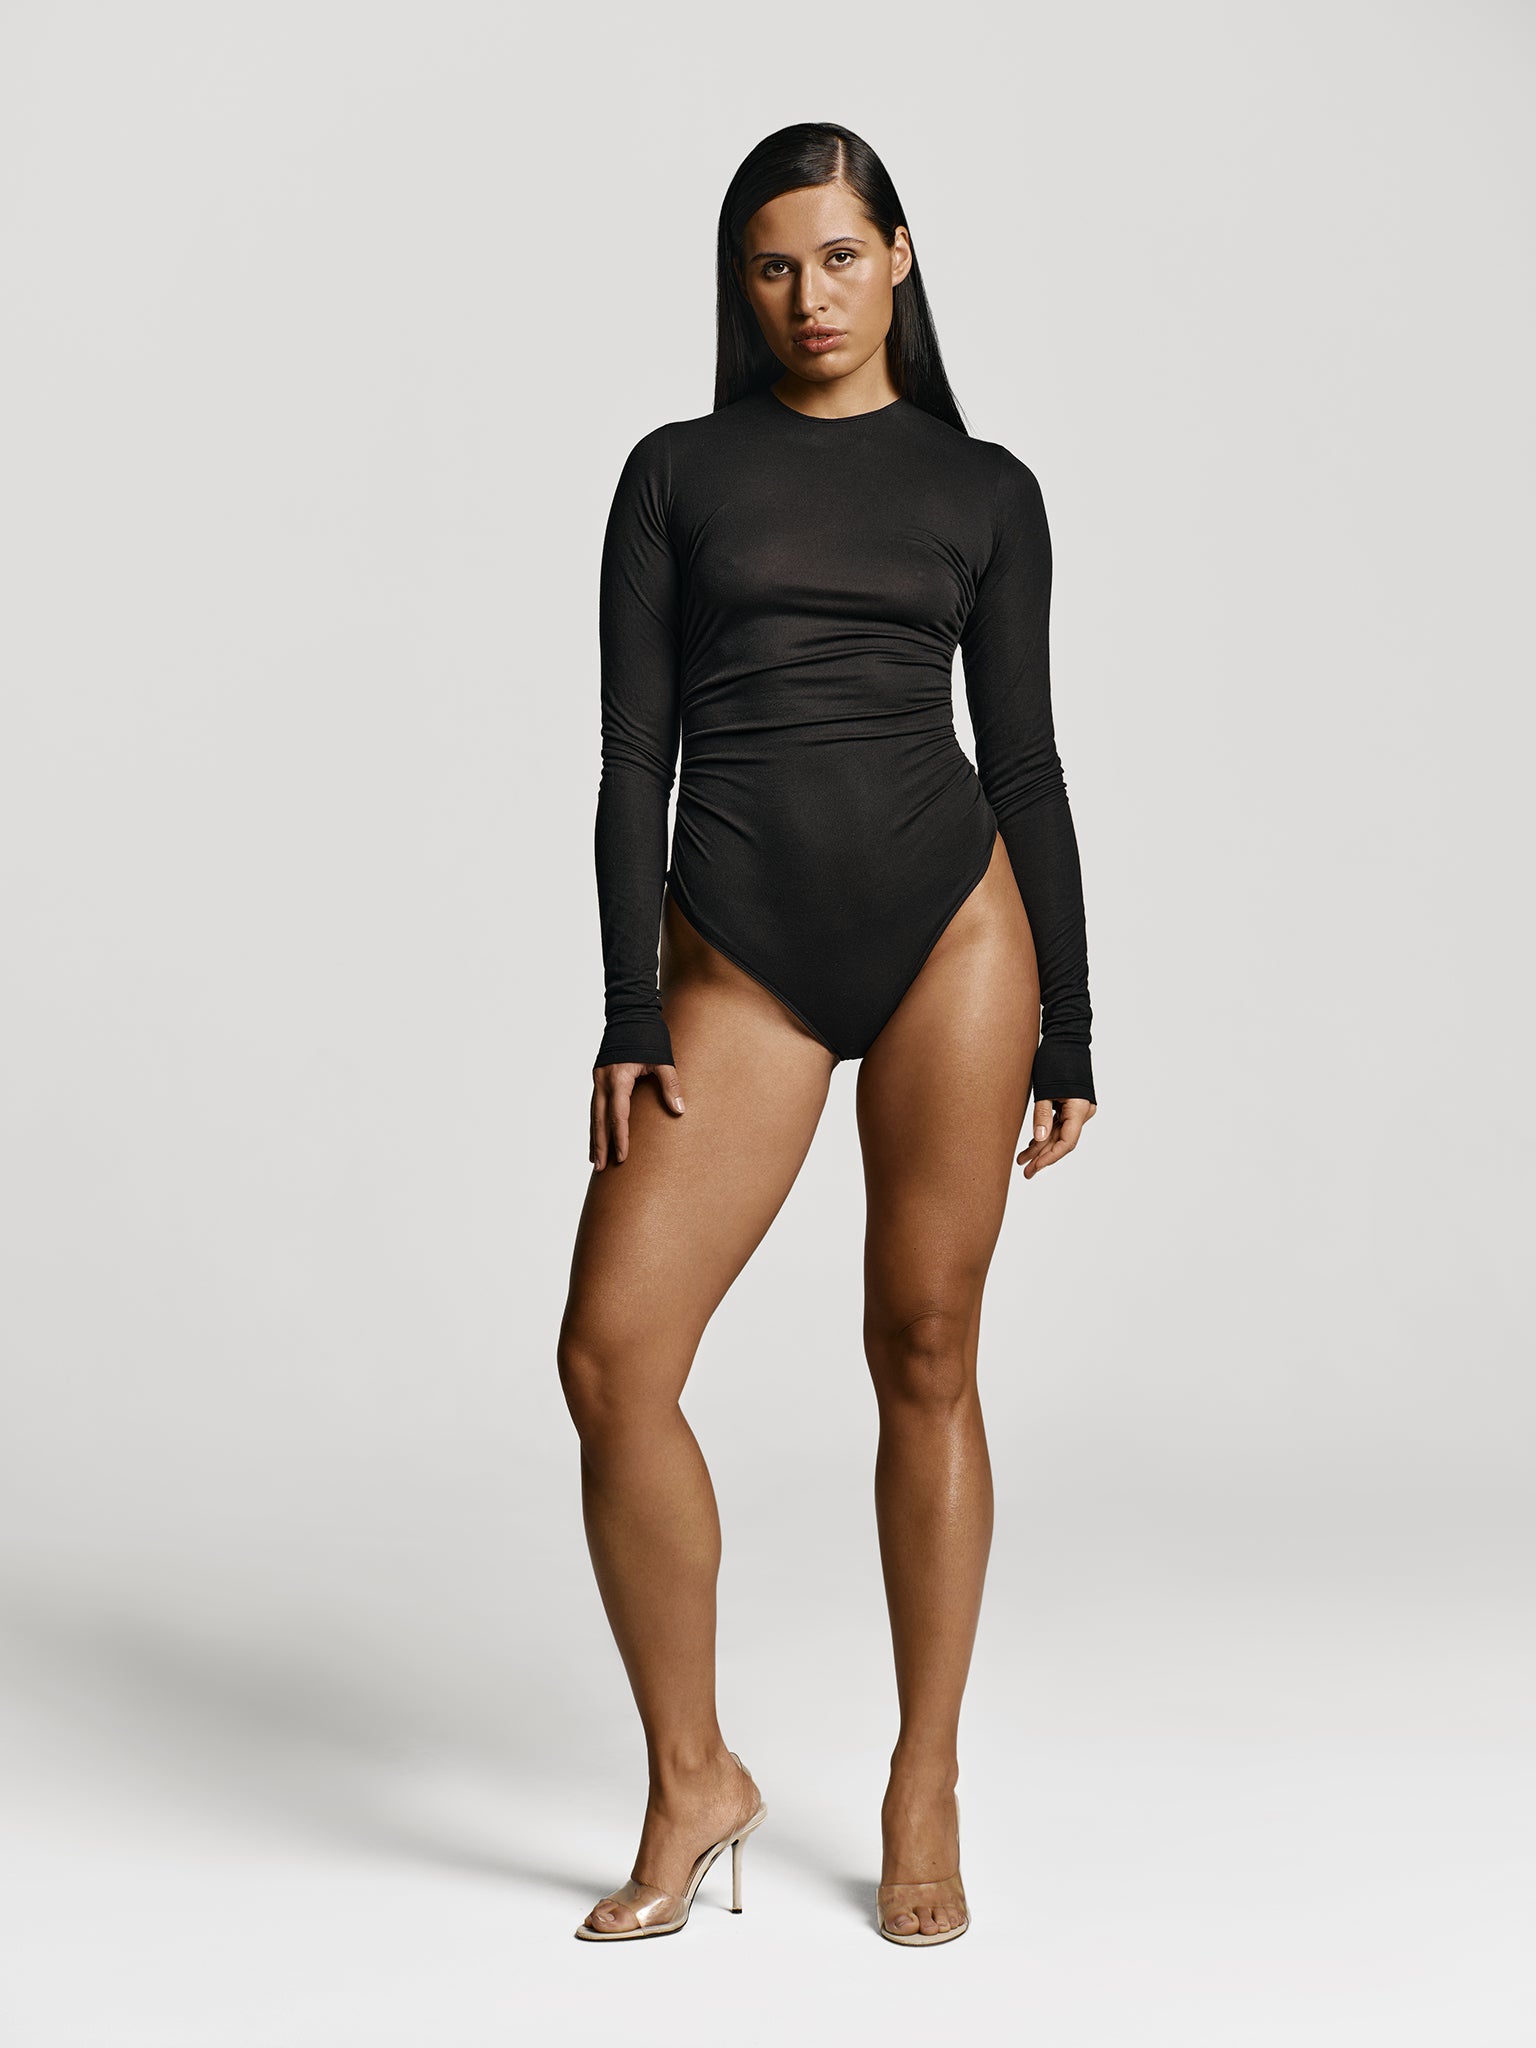 Full shot of a girl in a black long sleeved bodysuit with draping at the sides and high round neckline